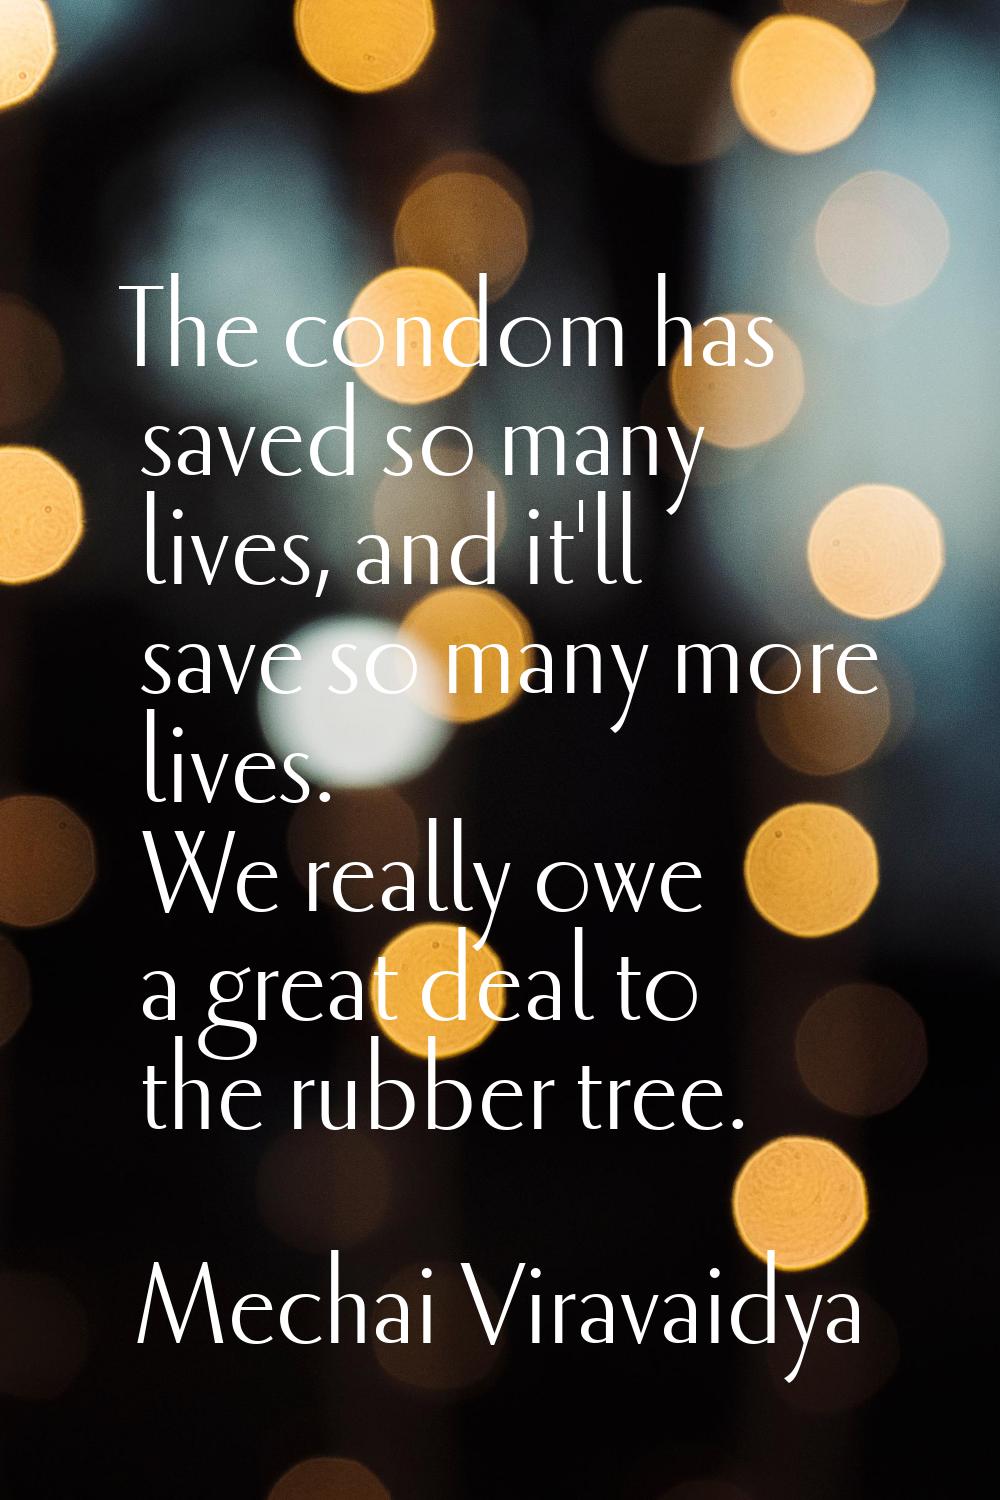 The condom has saved so many lives, and it'll save so many more lives. We really owe a great deal t